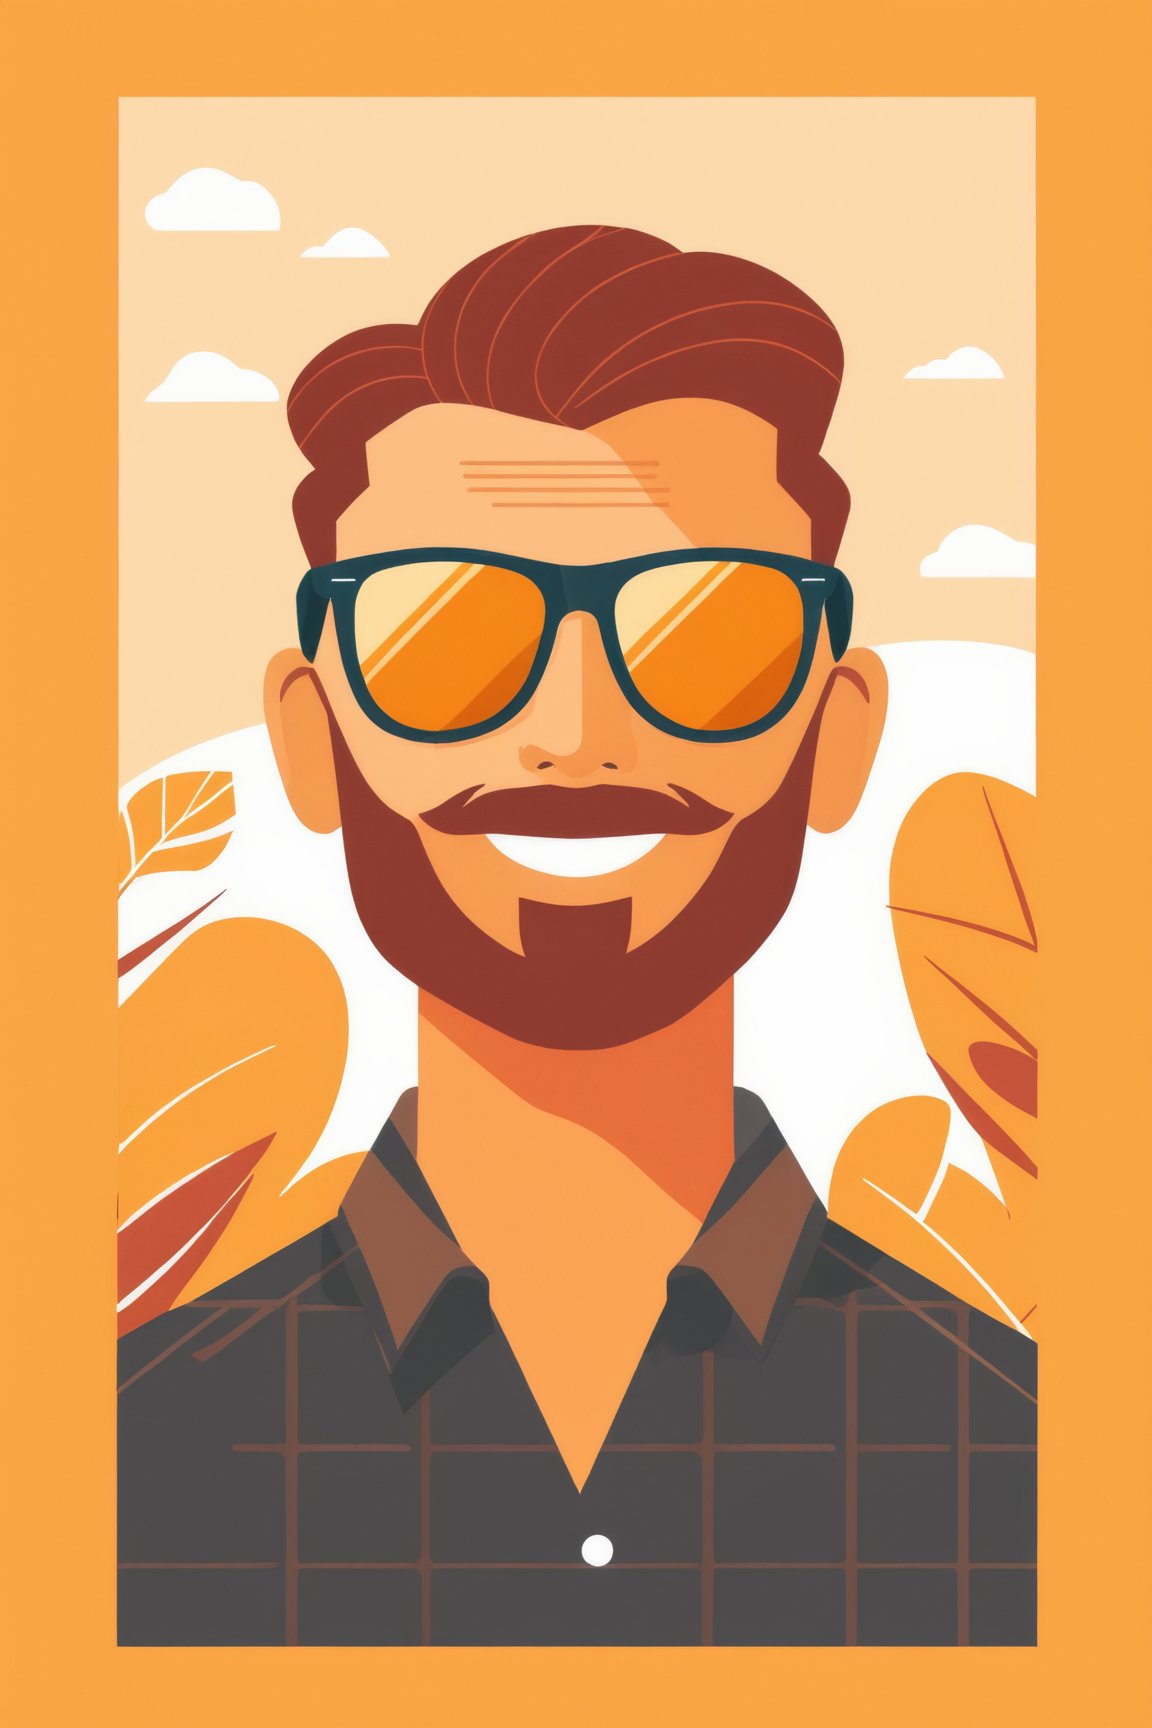 AiArtV, Flat Illustration, Vector Illustration,close-up portrait of a man with a warm smile, stylish sunglasses, and a relaxed outdoor ambiance